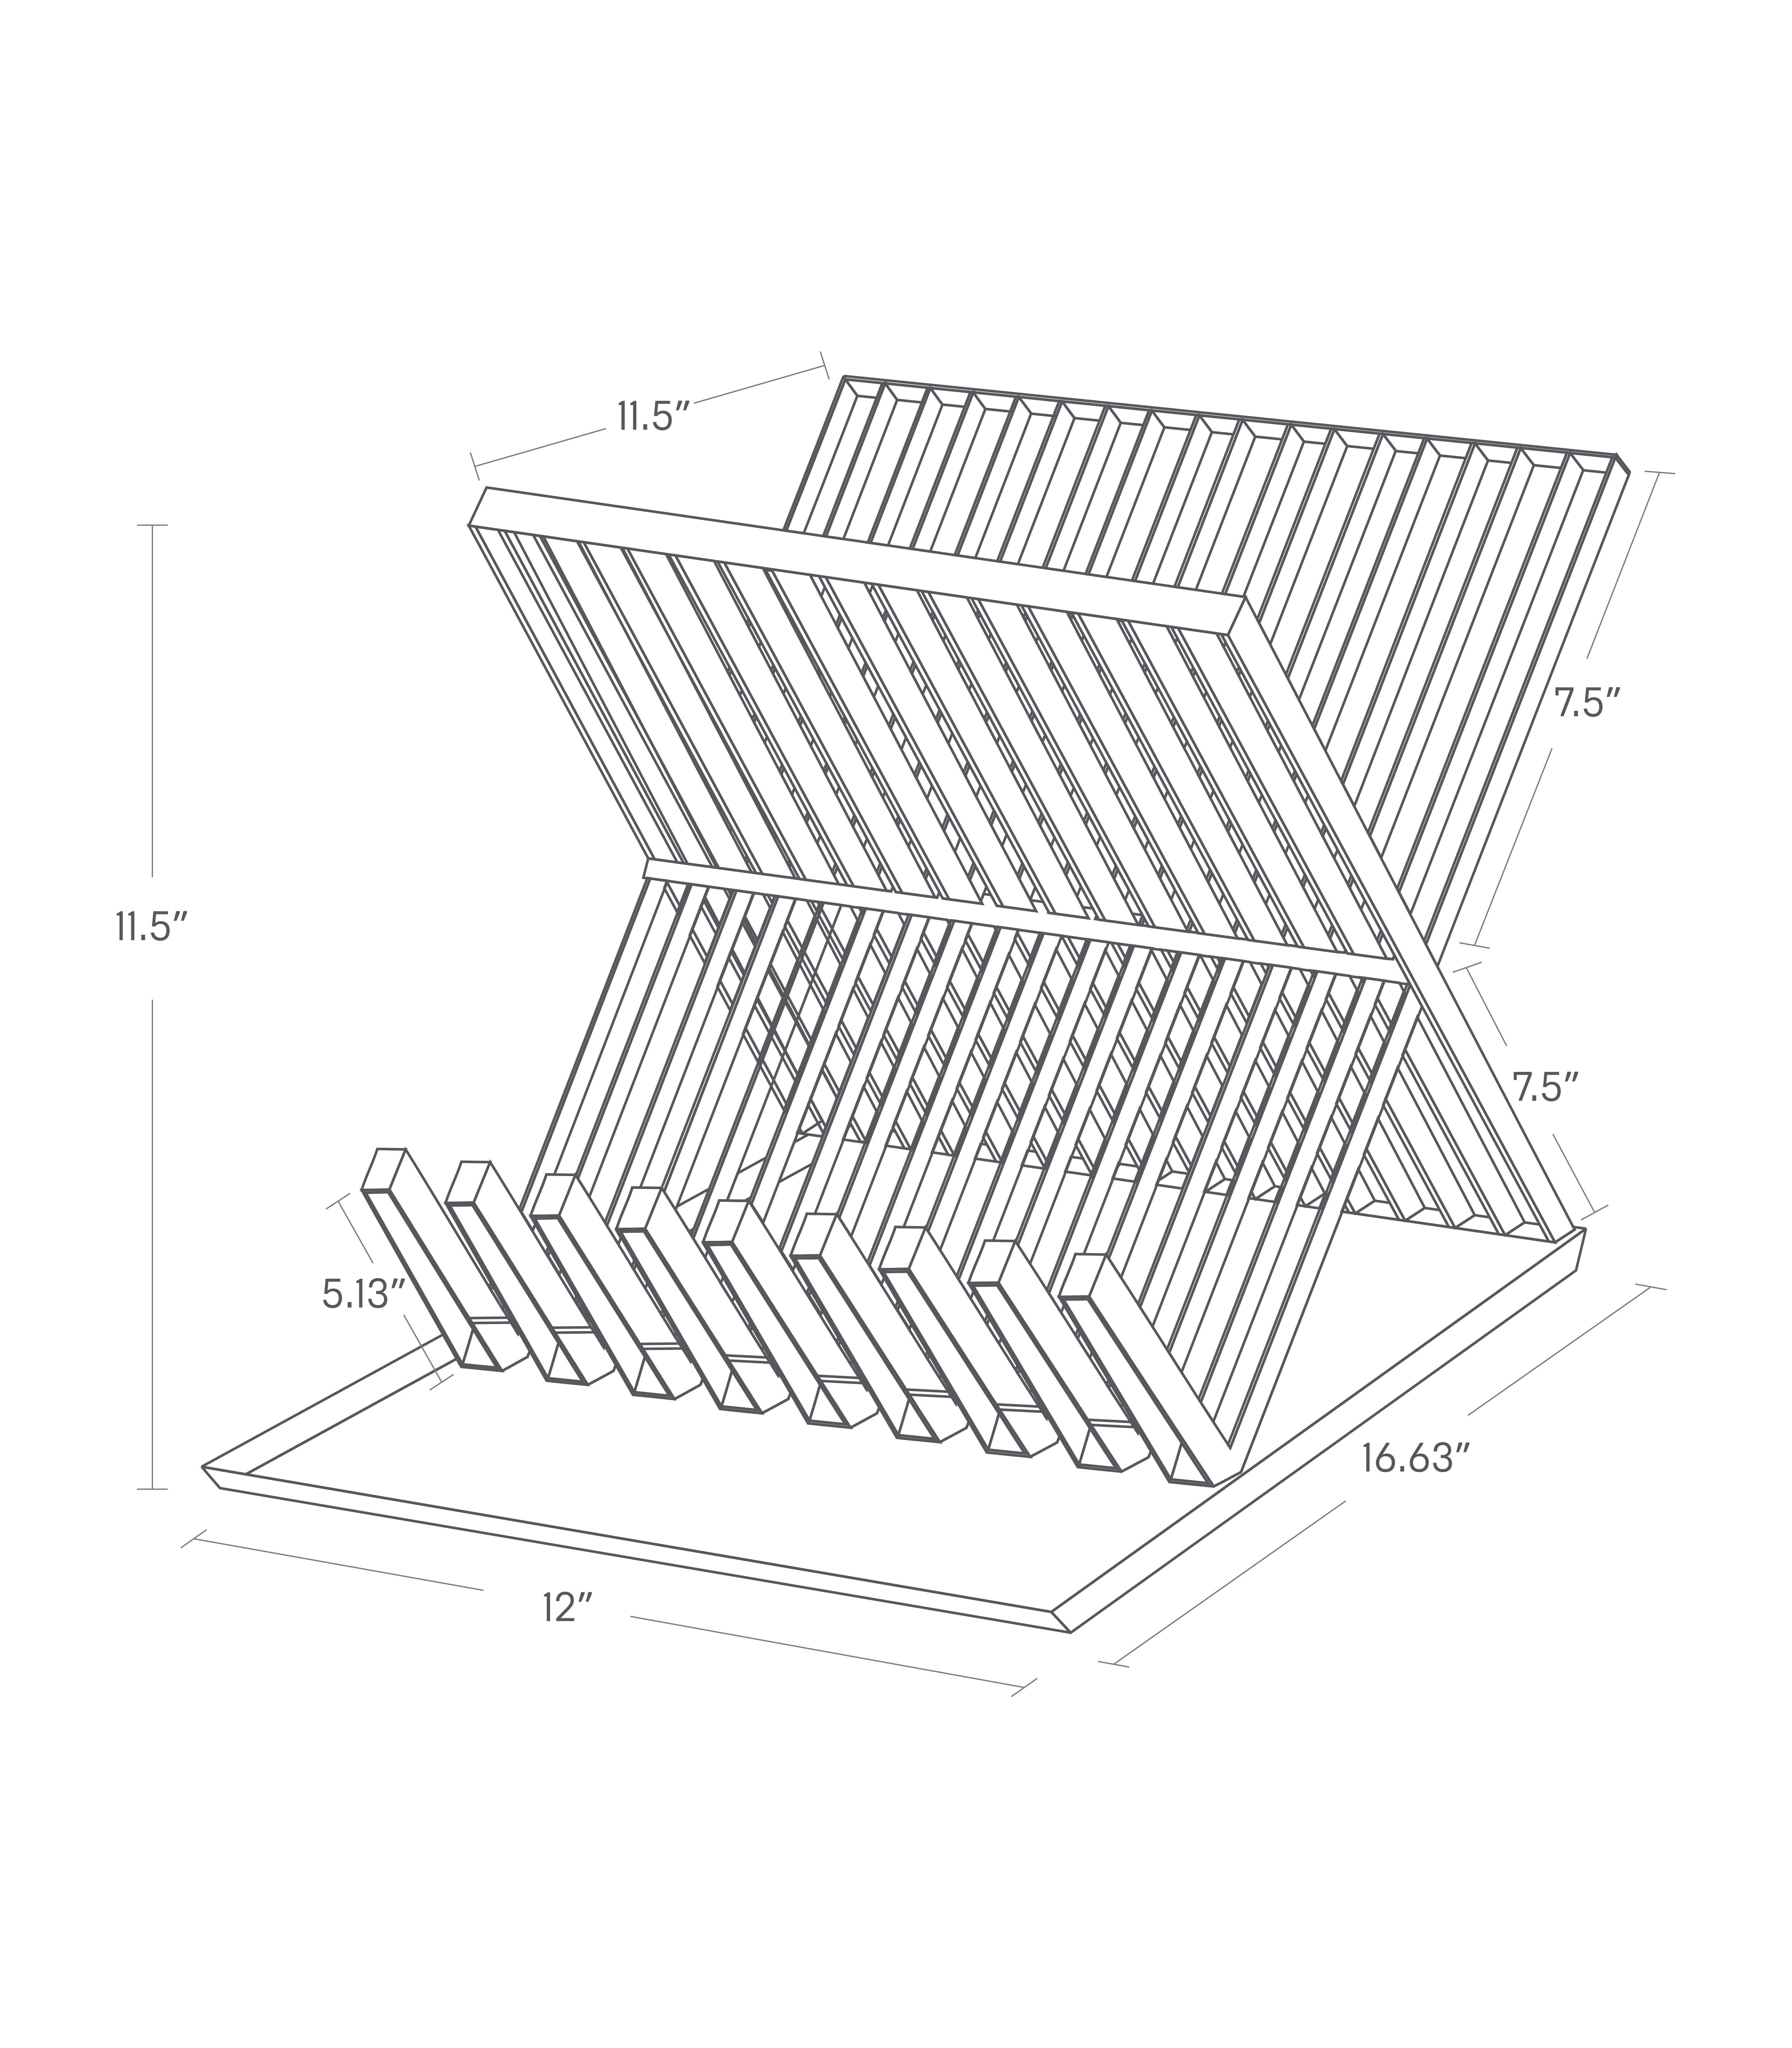 Dimension image for X-Shaped Dish Rack showing a length of 12